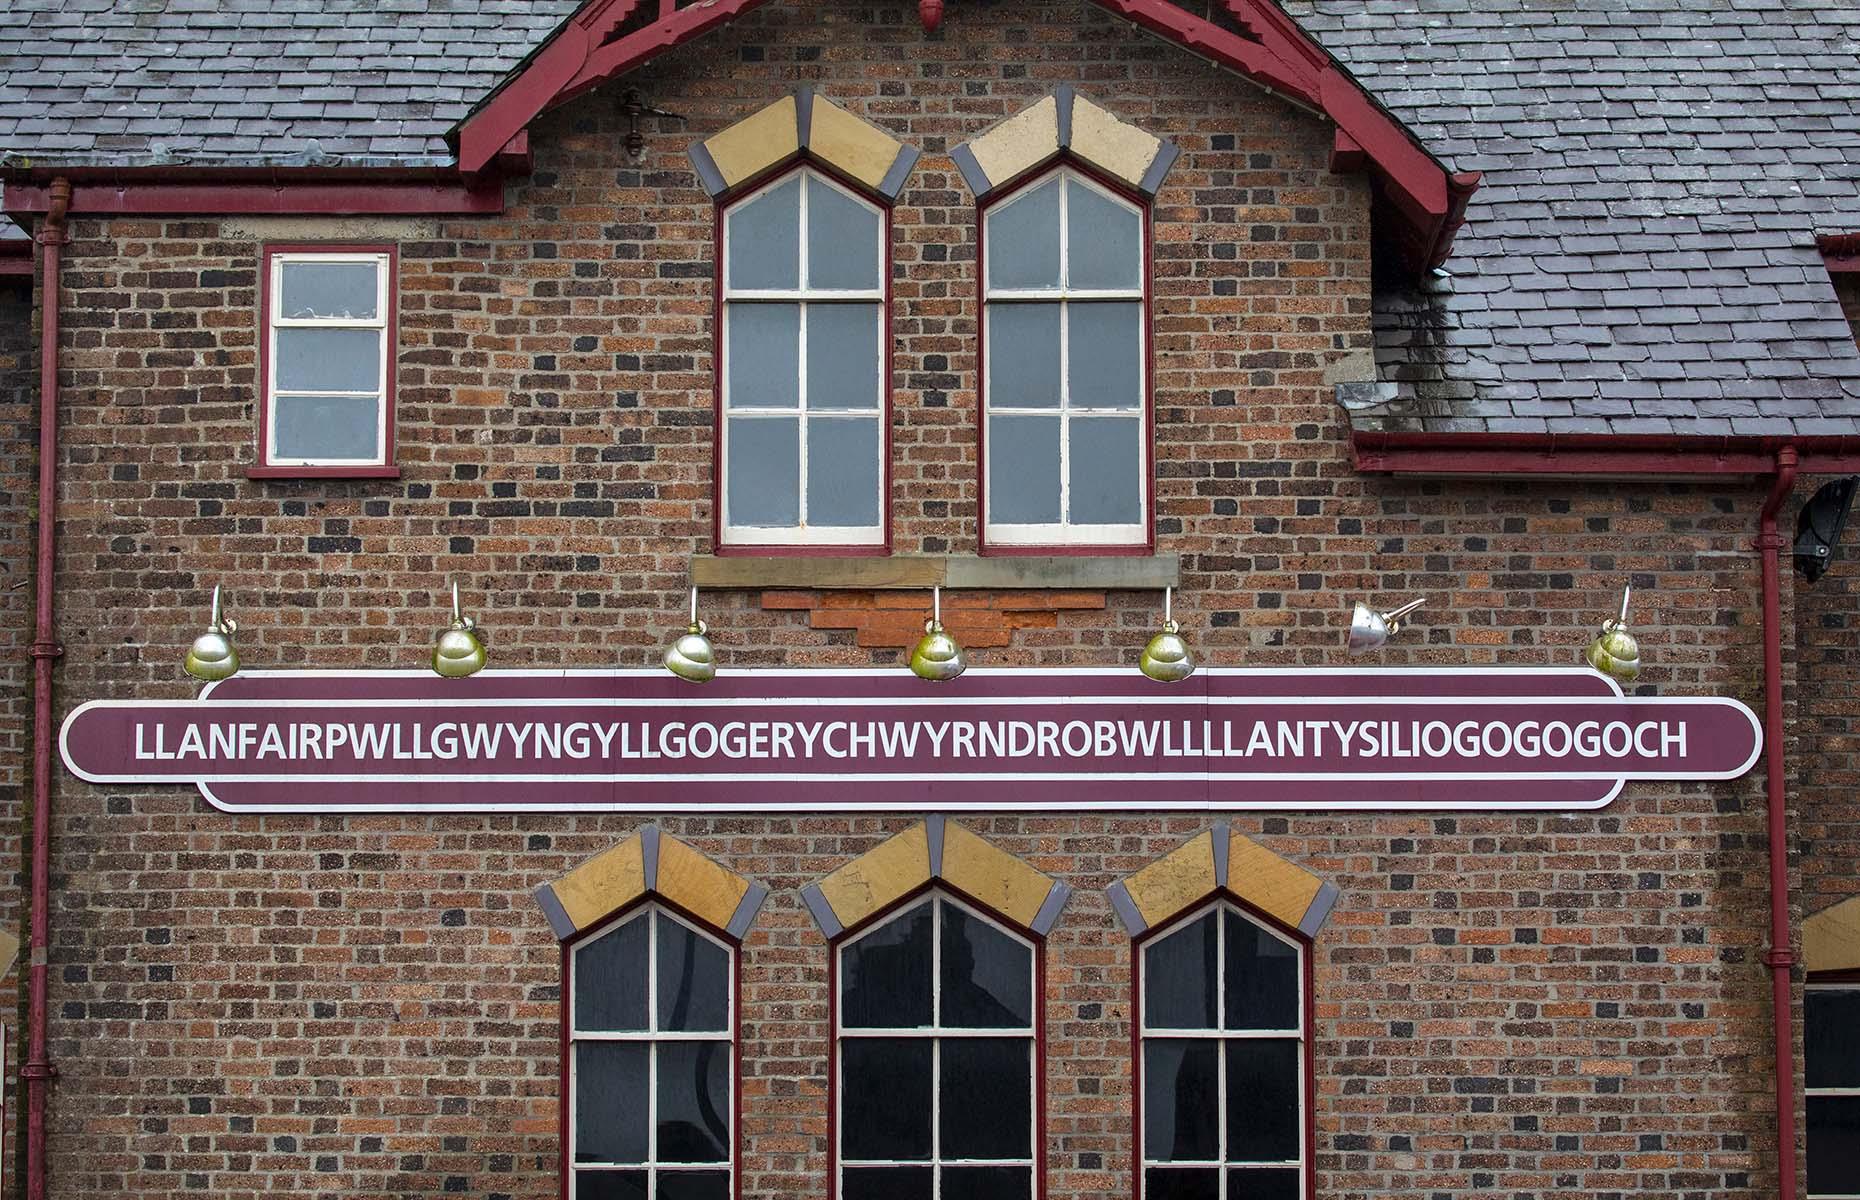 <p>Llanfairpwllgwyngyllgogerychwyrndrobwllllantysiliogogogoch – you'll find <a href="https://www.showmewales.co.uk/thedms.aspx?dms=3&venue=1162560">this remarkable train station</a> in Wales in the UK. Exactly 58 letters long, the station serves the village of Llanfairpwllgwyngyll and roughly translates as St Mary's Church in the hollow of white hazel near a rapid whirlpool and the Church of St Tysilio near the red cave in English. As it turns out, the name has no historic significance and is a marketing gimmick from the 1880s to attract tourists that stuck.</p>